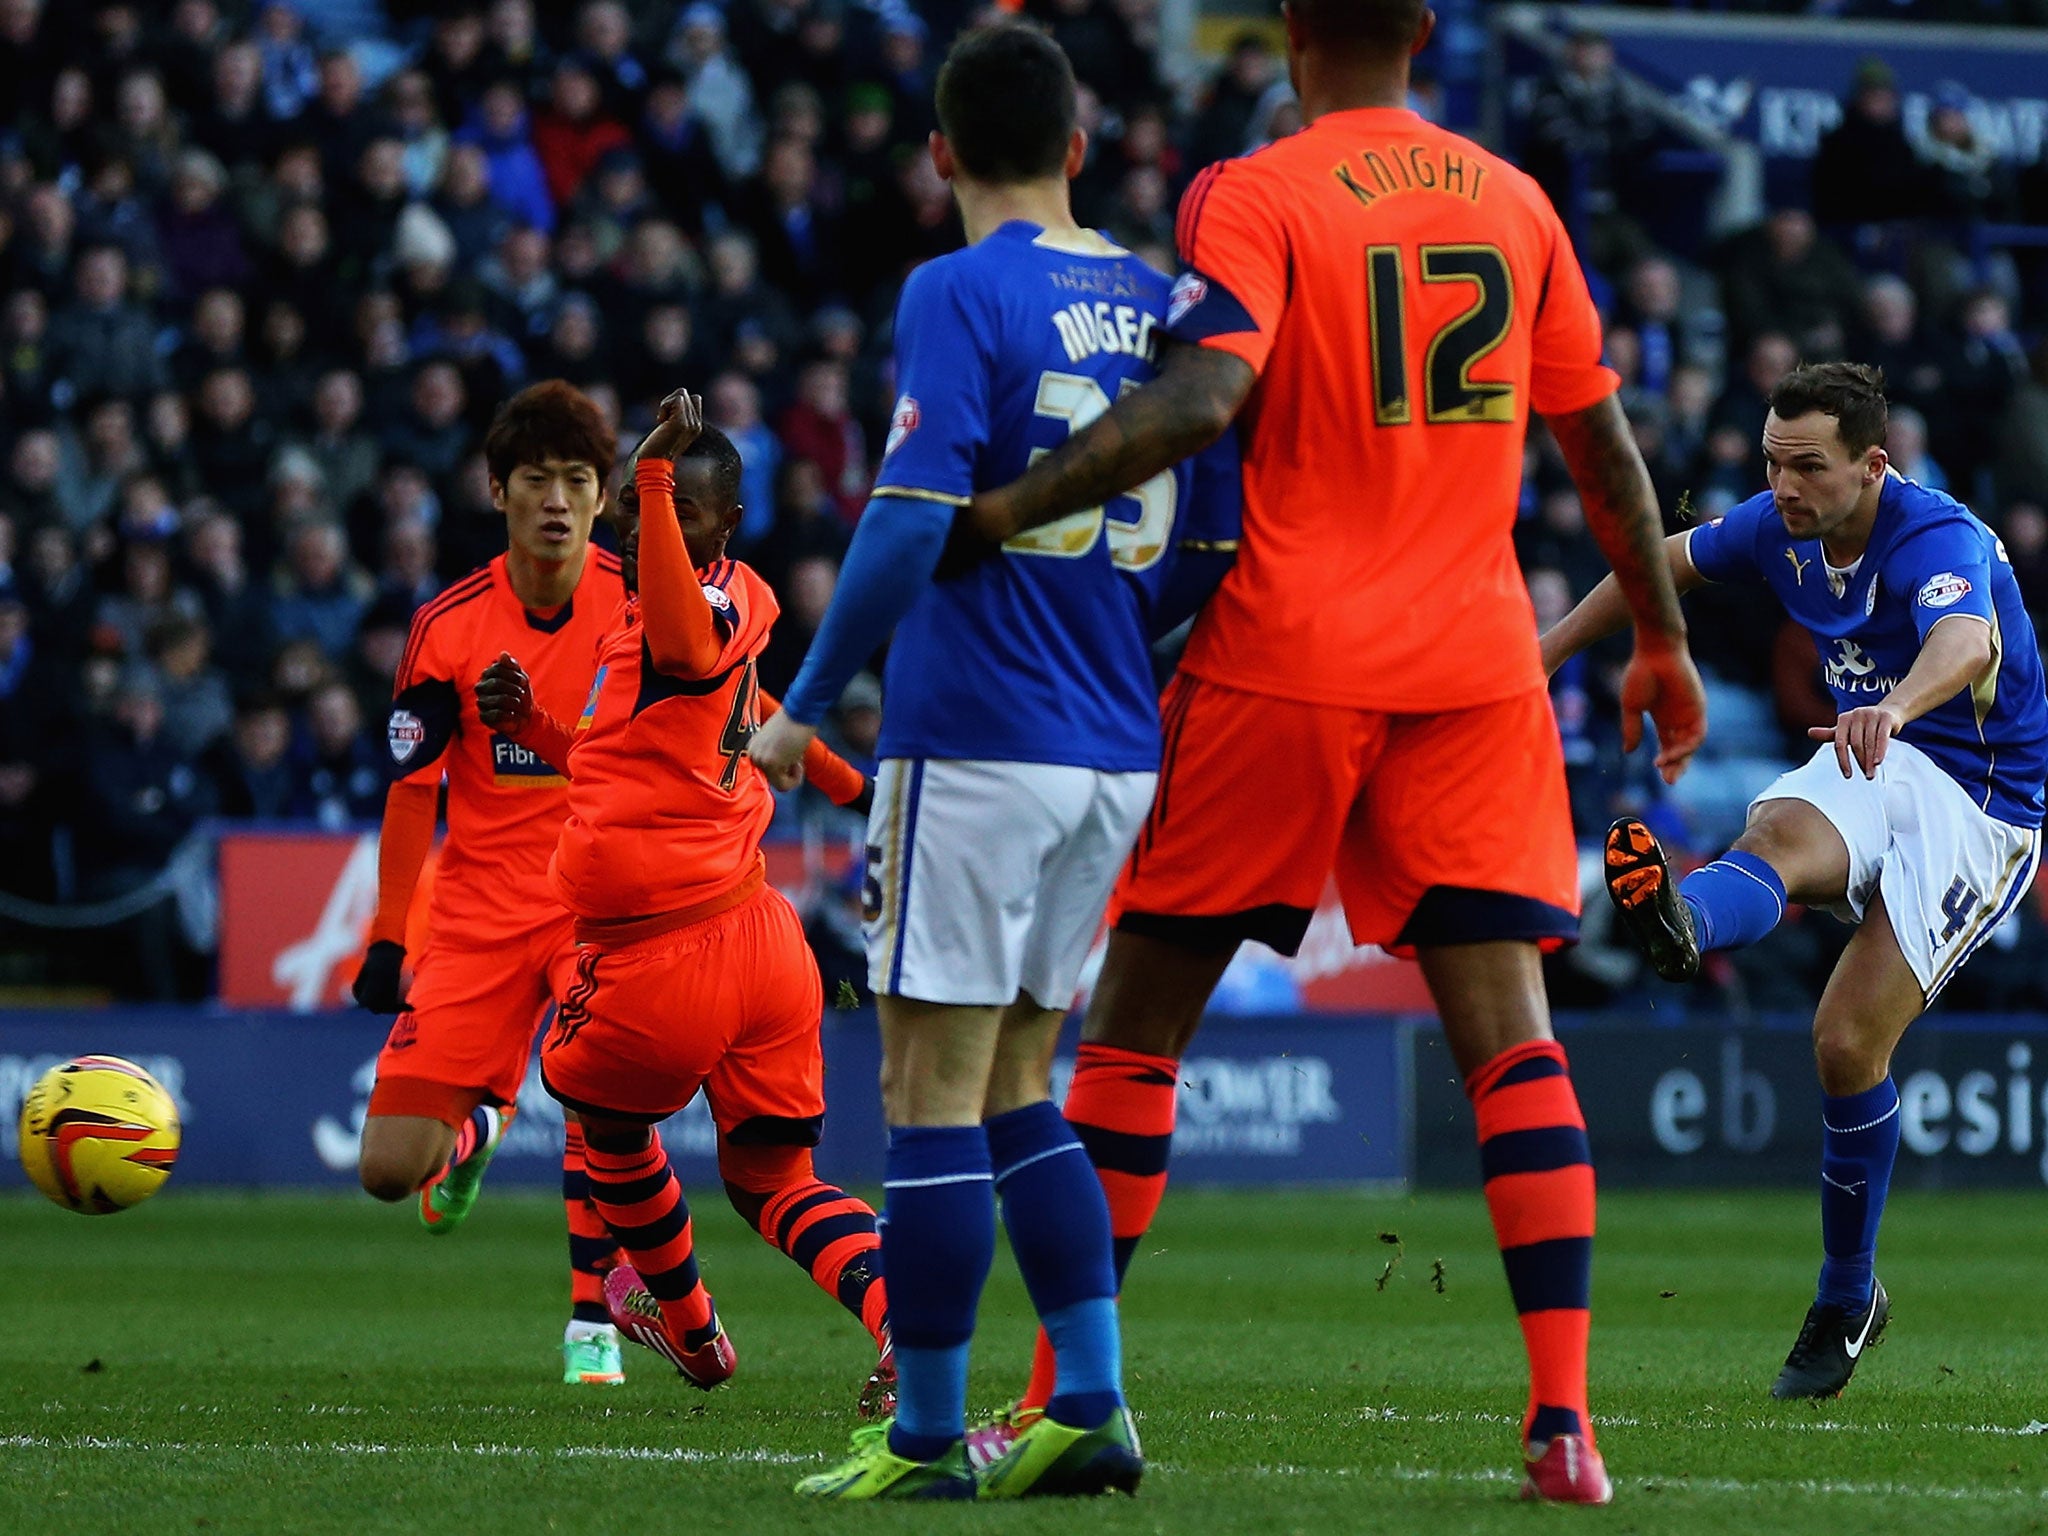 Danny Drinkwater scores for Championship leaders Leicester in their 5-3 home win over Bolton